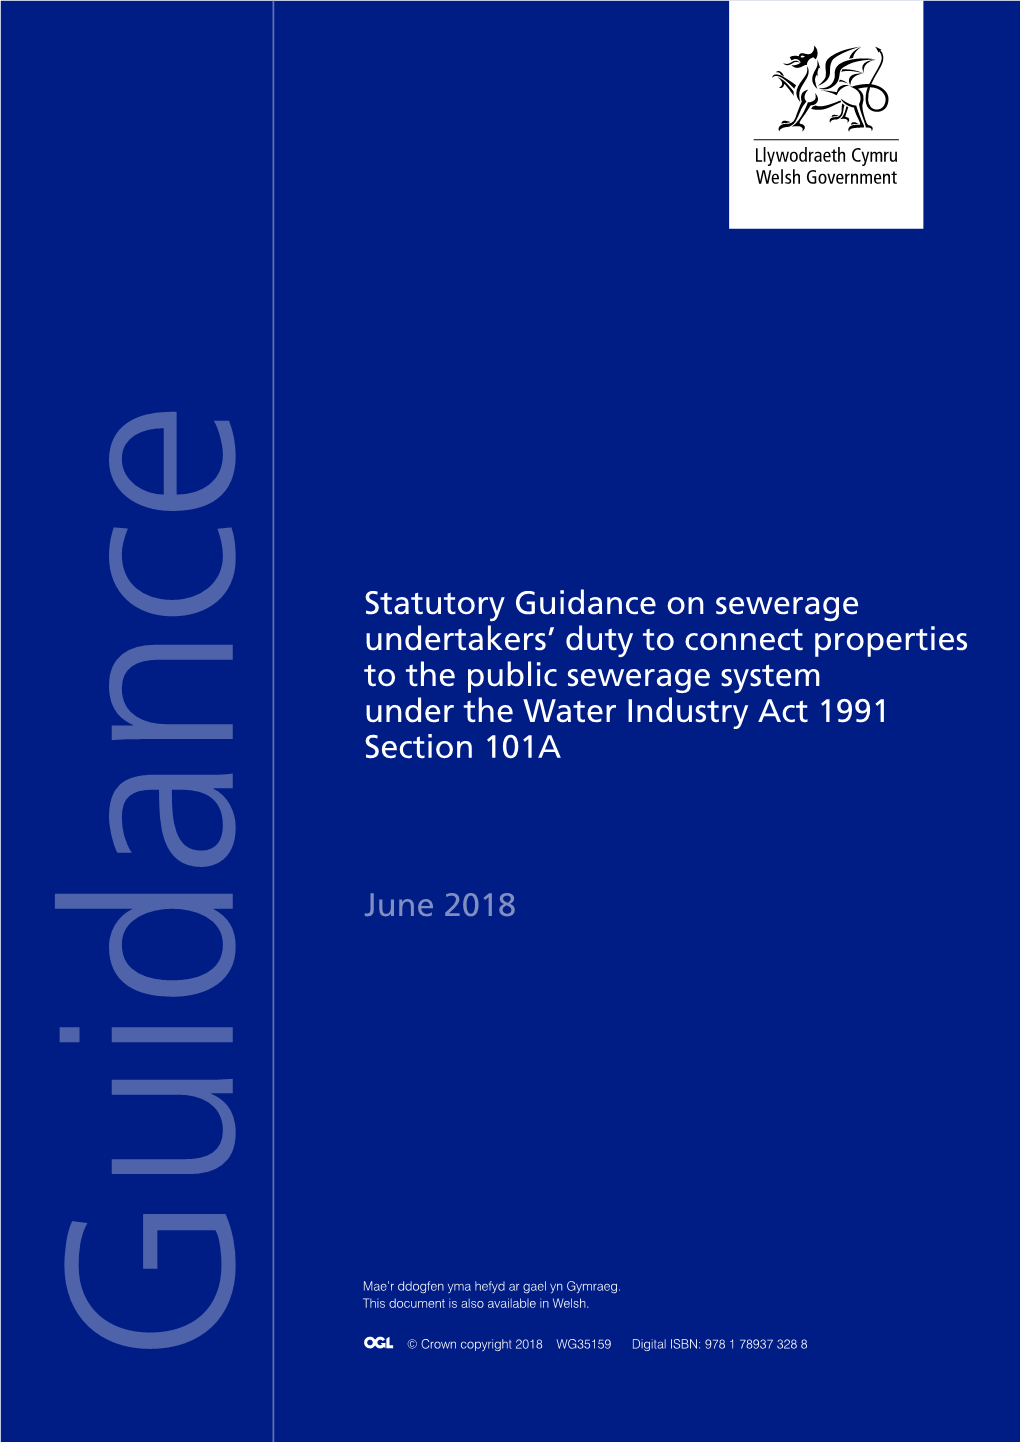 Statutory Guidance on Sewerage Undertakers Duty to Connect